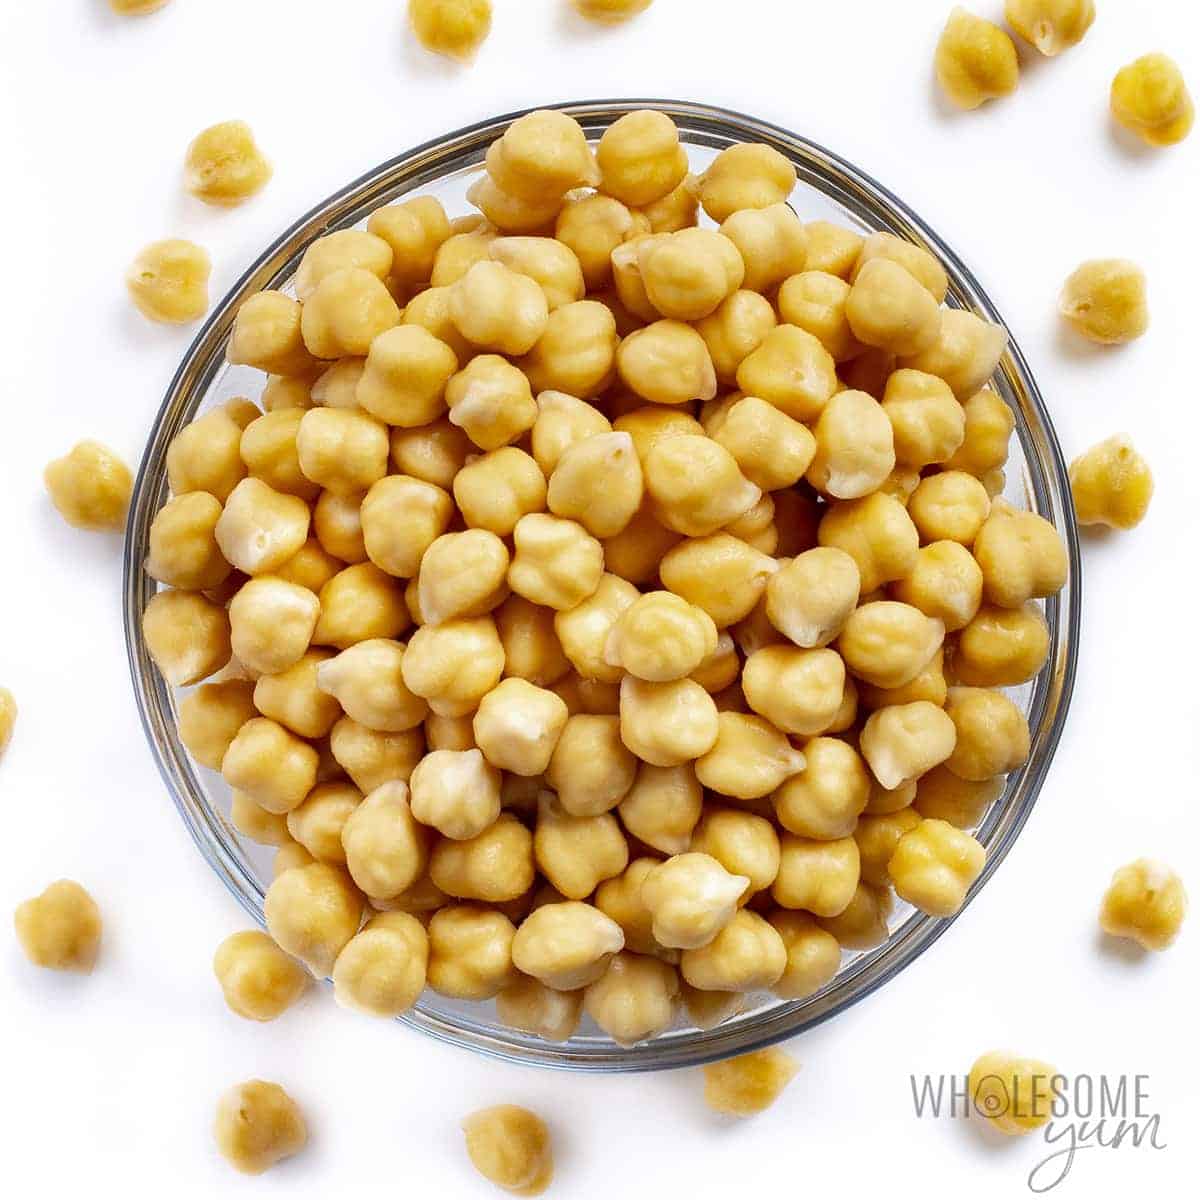 Are chickpeas keto, or are carbs in chickpeas high? Find out whether this bowl of chickpeas is keto friendly.